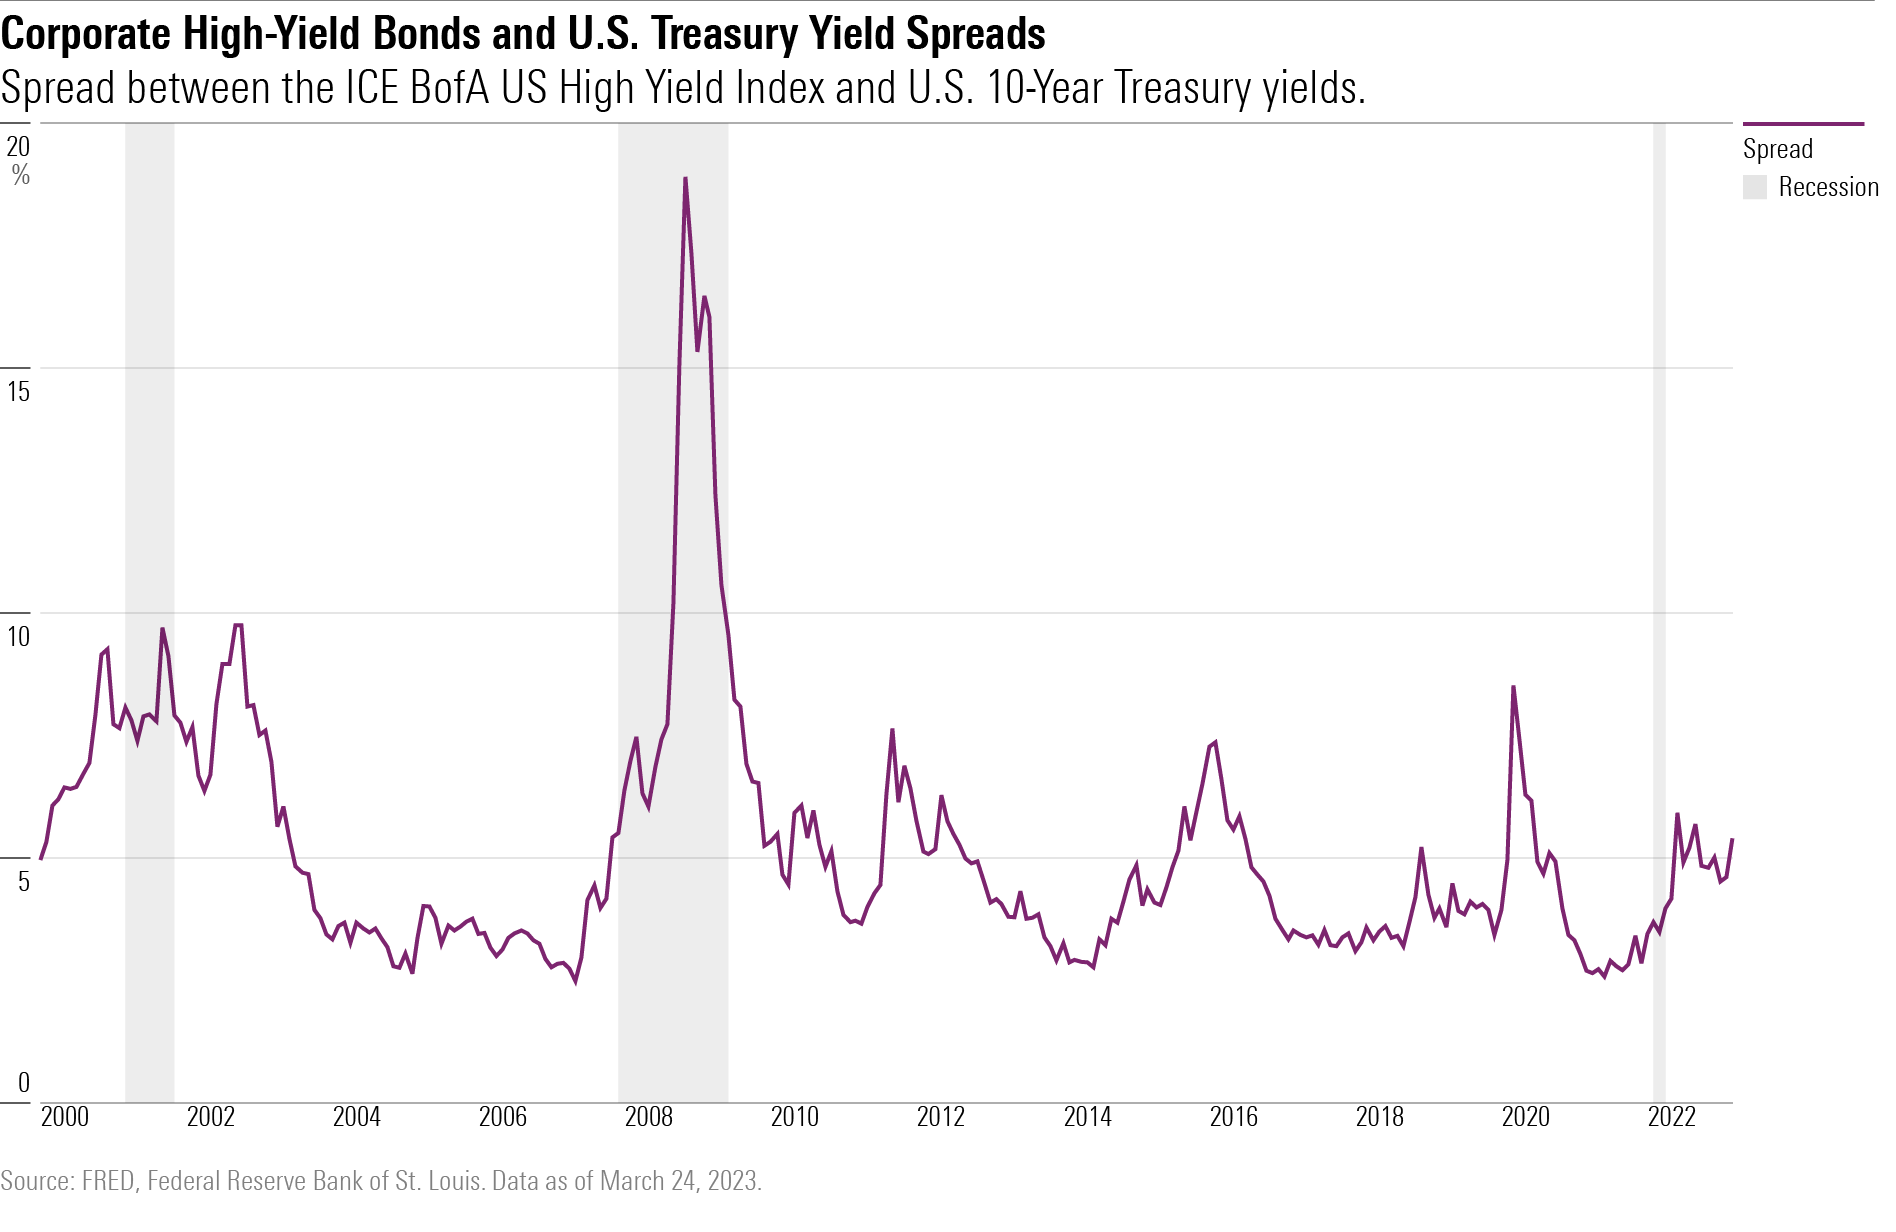 A line chart showing historical spreads between corporate high-yield bonds and 10-year U.S. treasury yields since 2000.